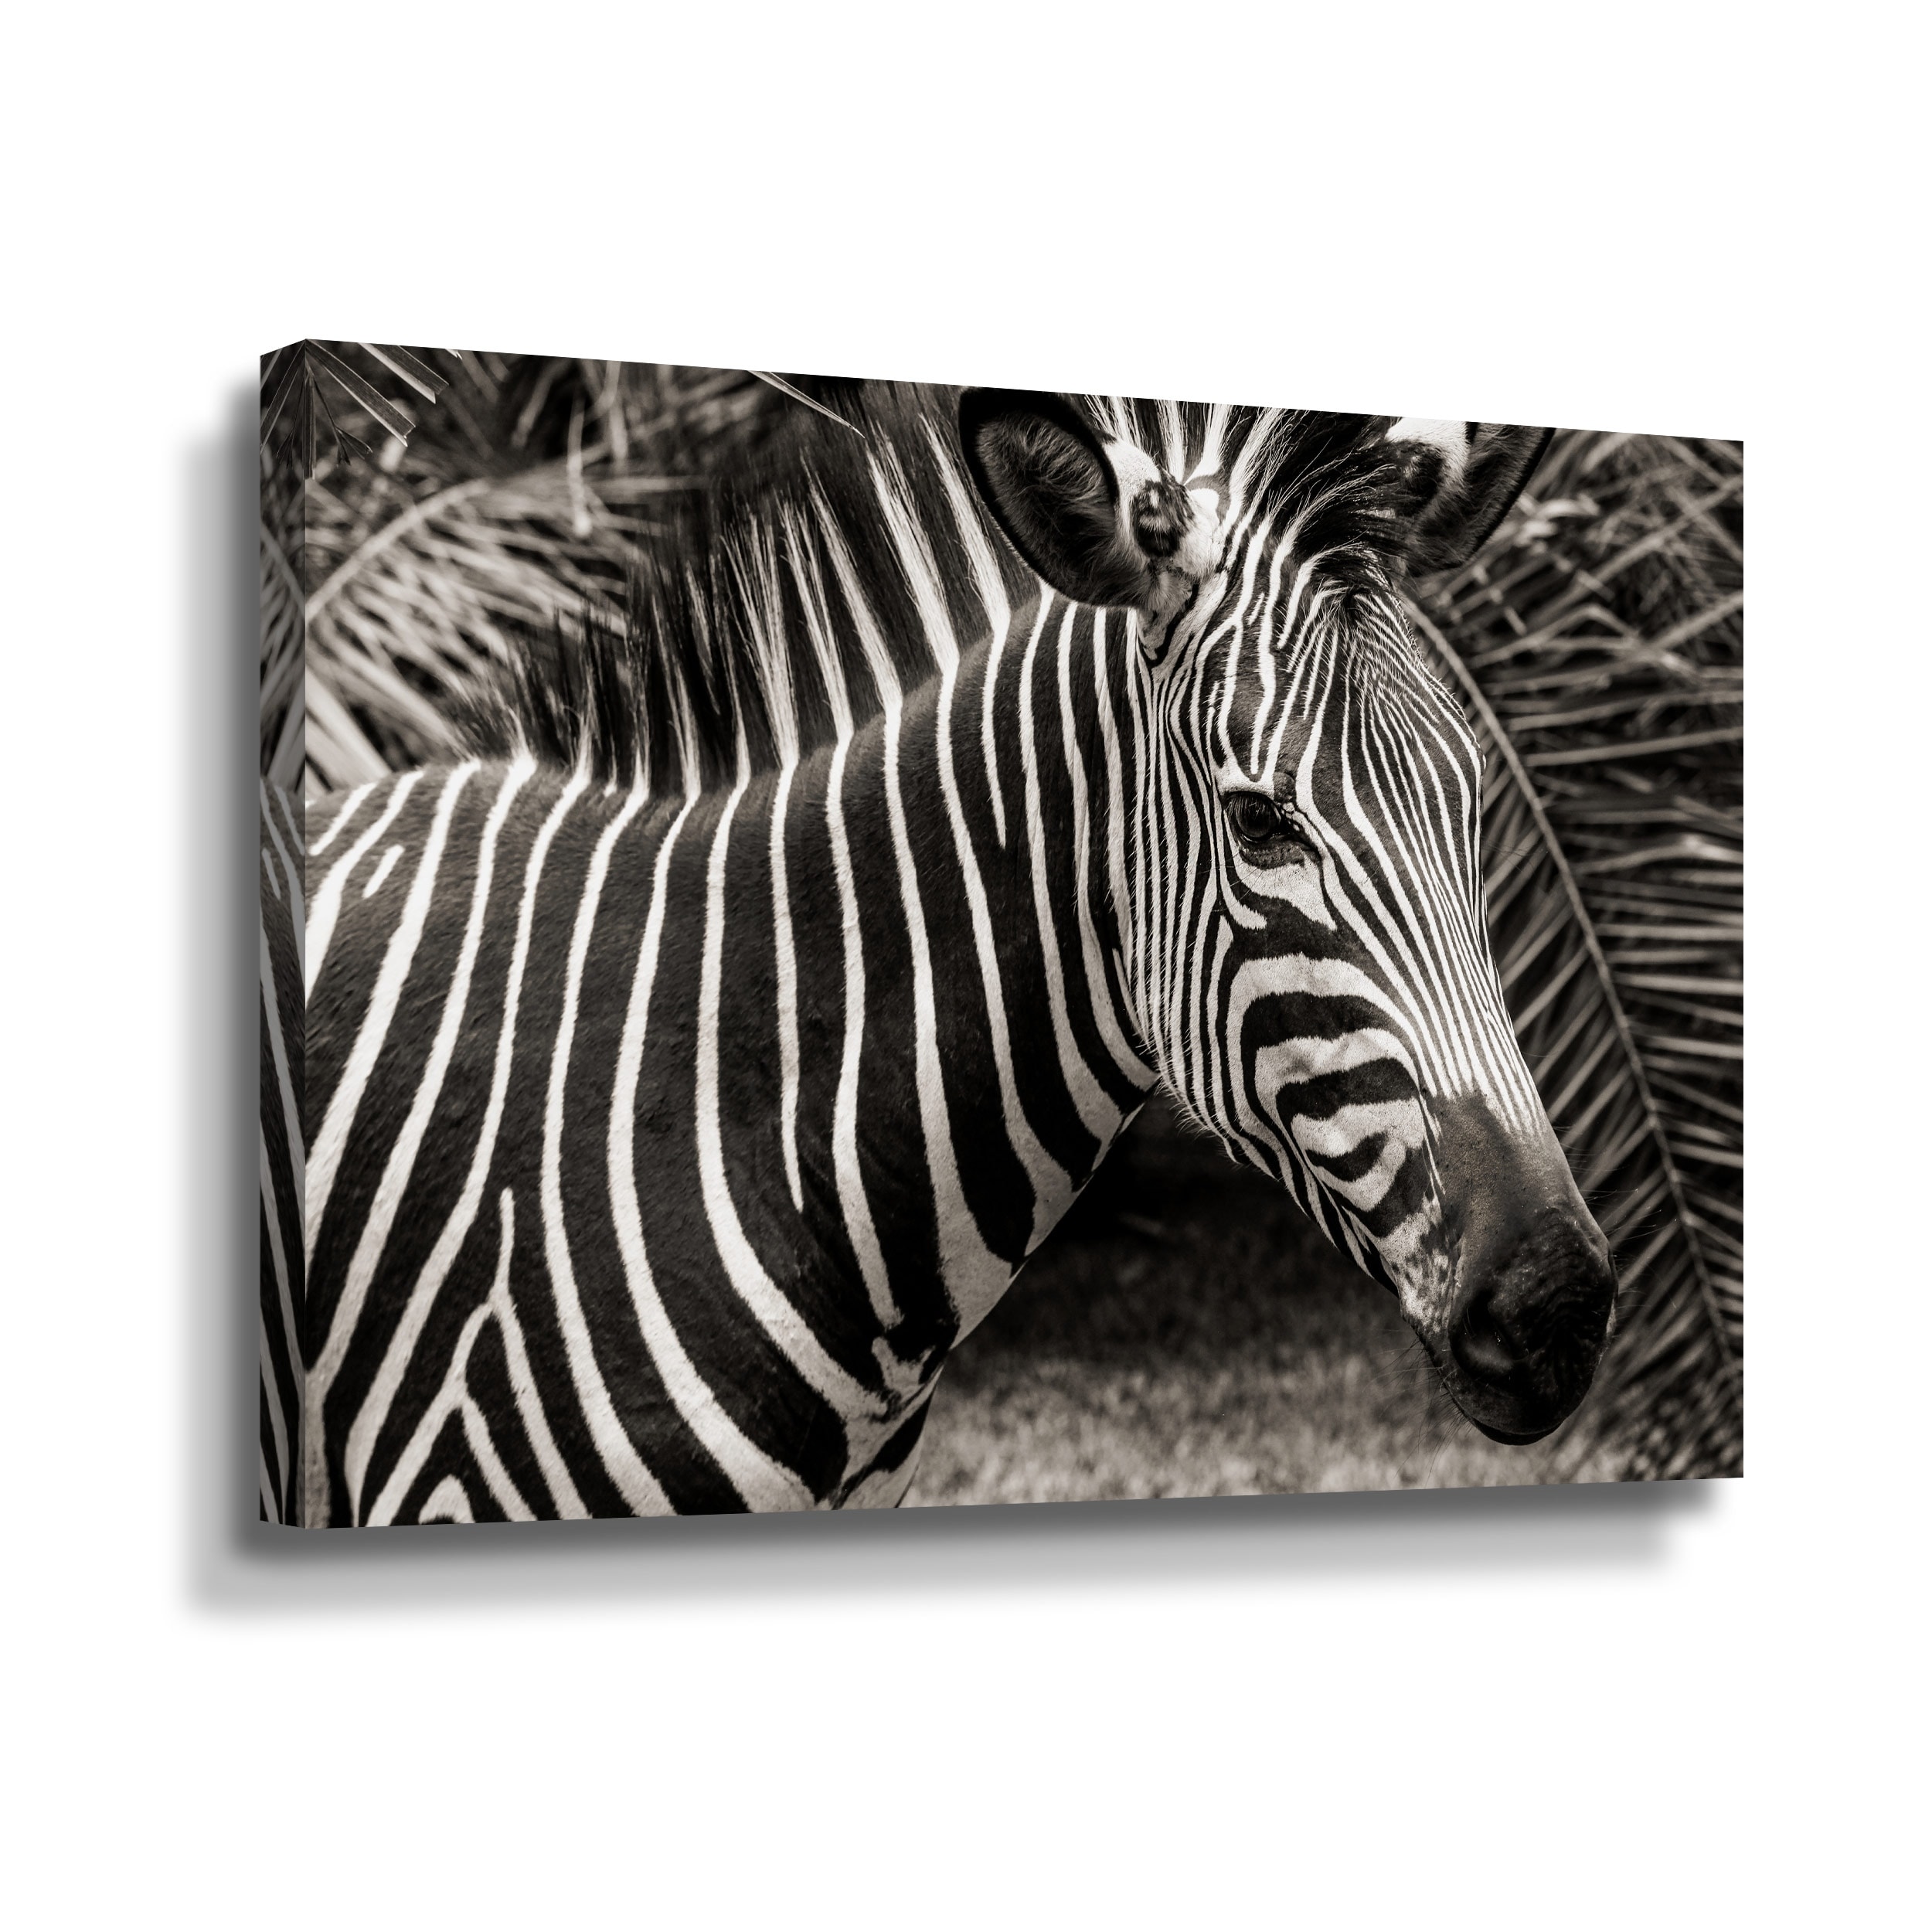 Zambia Zebra by Susannah Dowell Gallery Wrapped Canvas